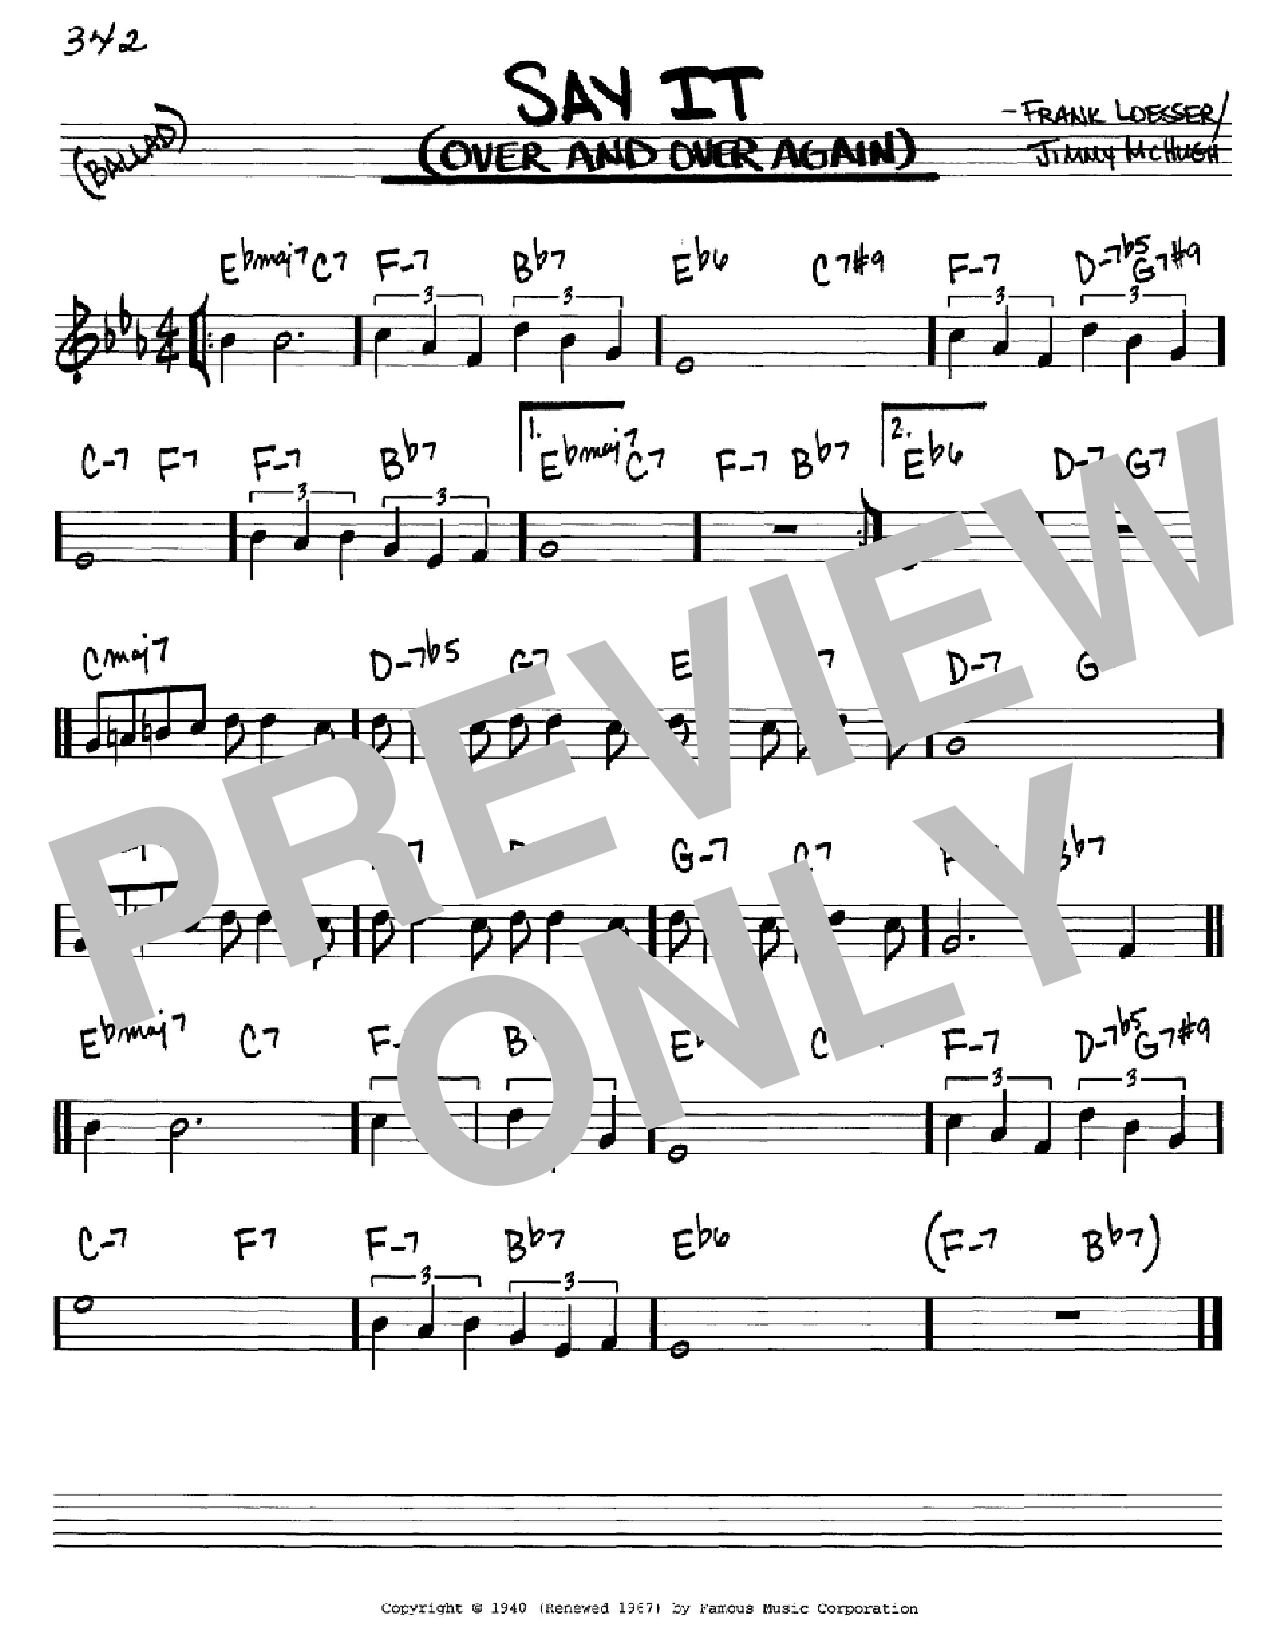 Download Frank Loesser Say It (Over And Over Again) Sheet Music